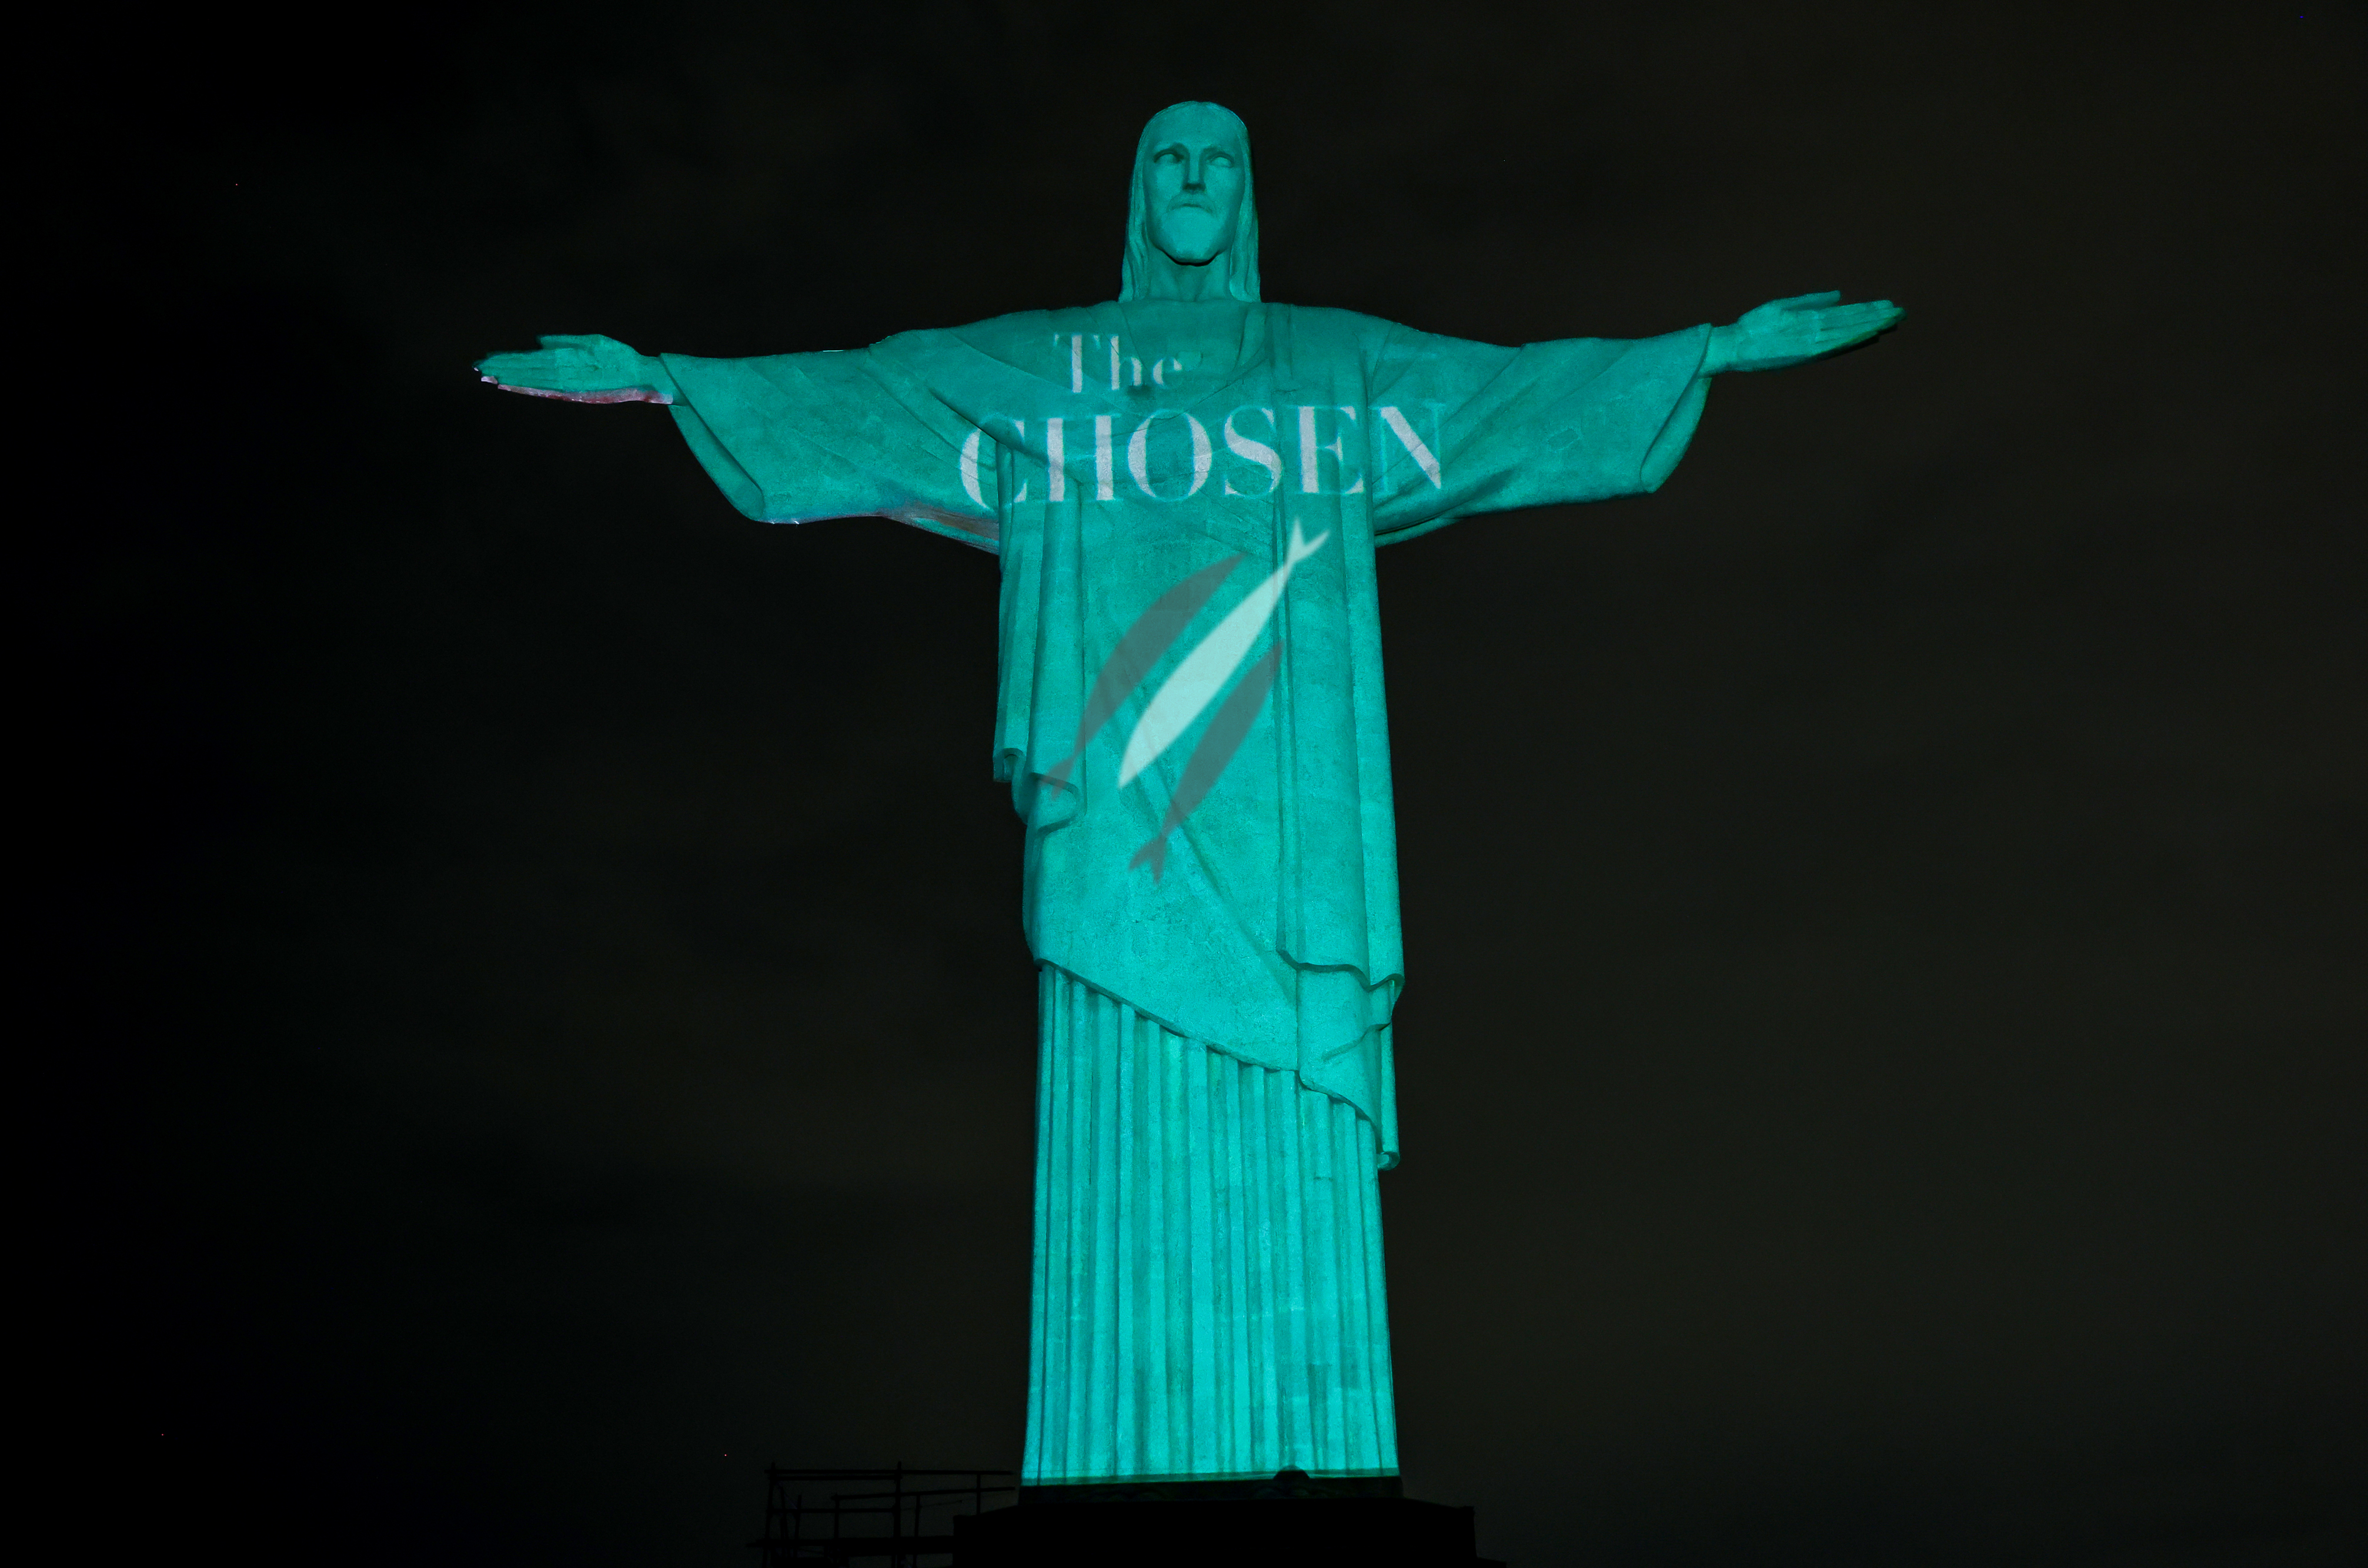 The Chosen is projected onto Brazils Christ the Redeemer Statue